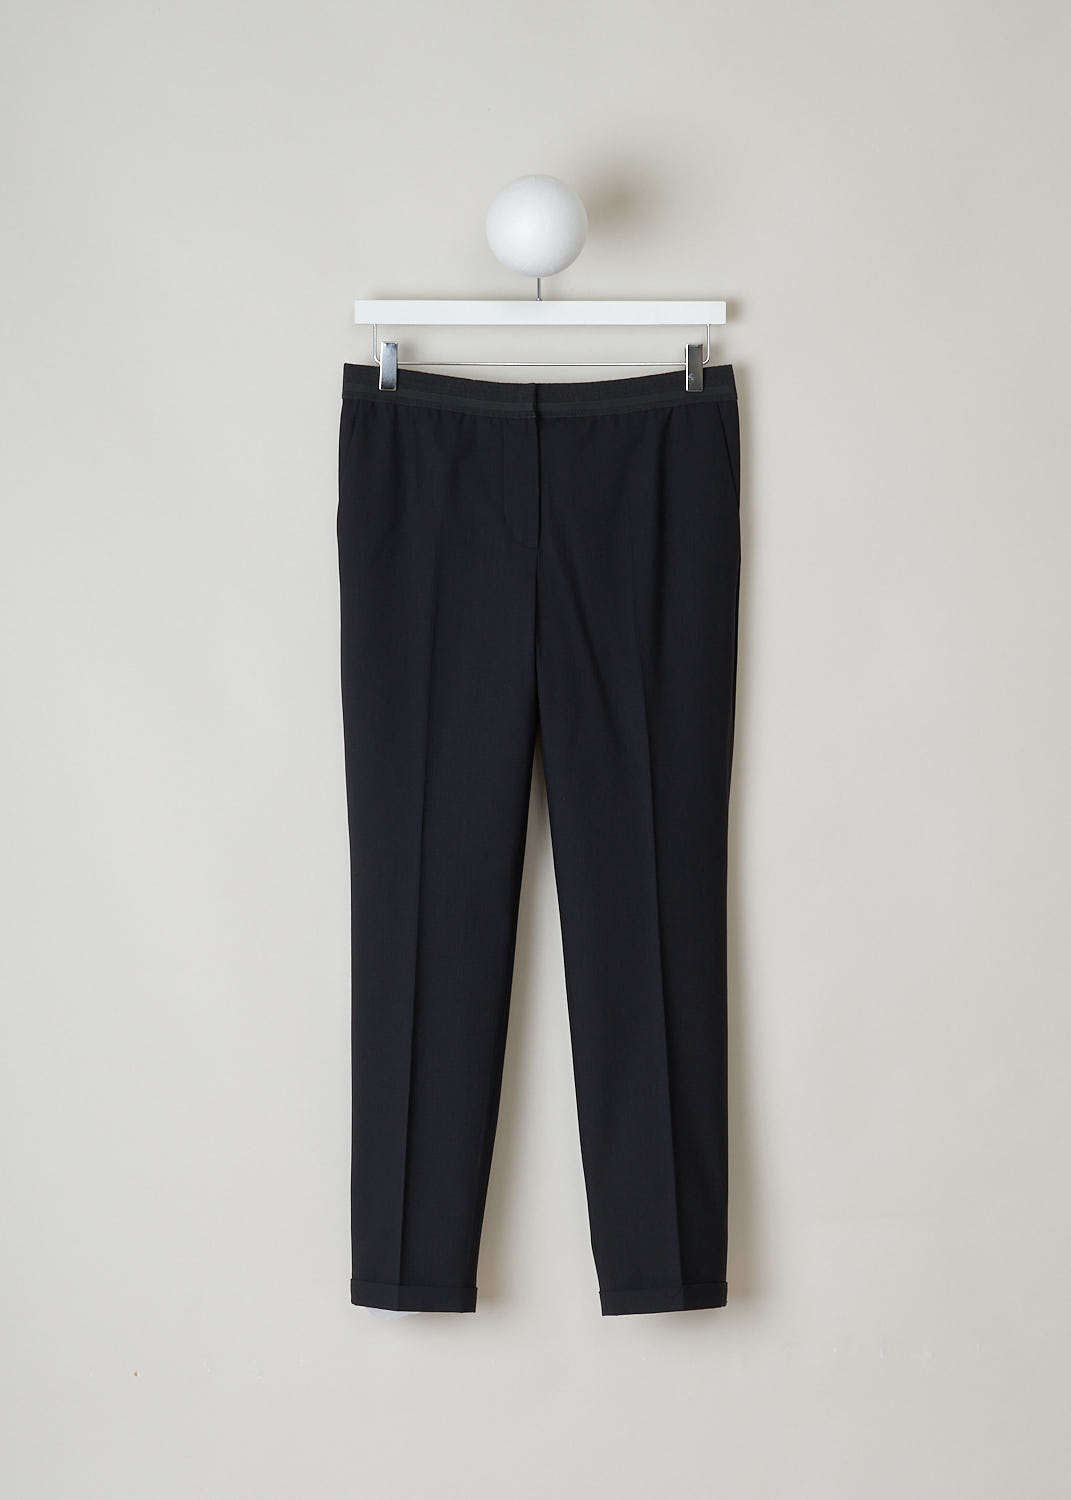 BRUNELLO CUCINELLI, BLACK PANTS WITH PARTLY ELASTICATED WAISTBAND, M0W07P1500_C101_M, Black, Front, Black pants with partly elasticated waistline. A clasp and zipper function as the closing option. The pants feature forward slanted pockets in the front, and two buttoned welt pockets in the back. Along the length of the pant leg, centre creases can be found. These pants have a folded hem.
